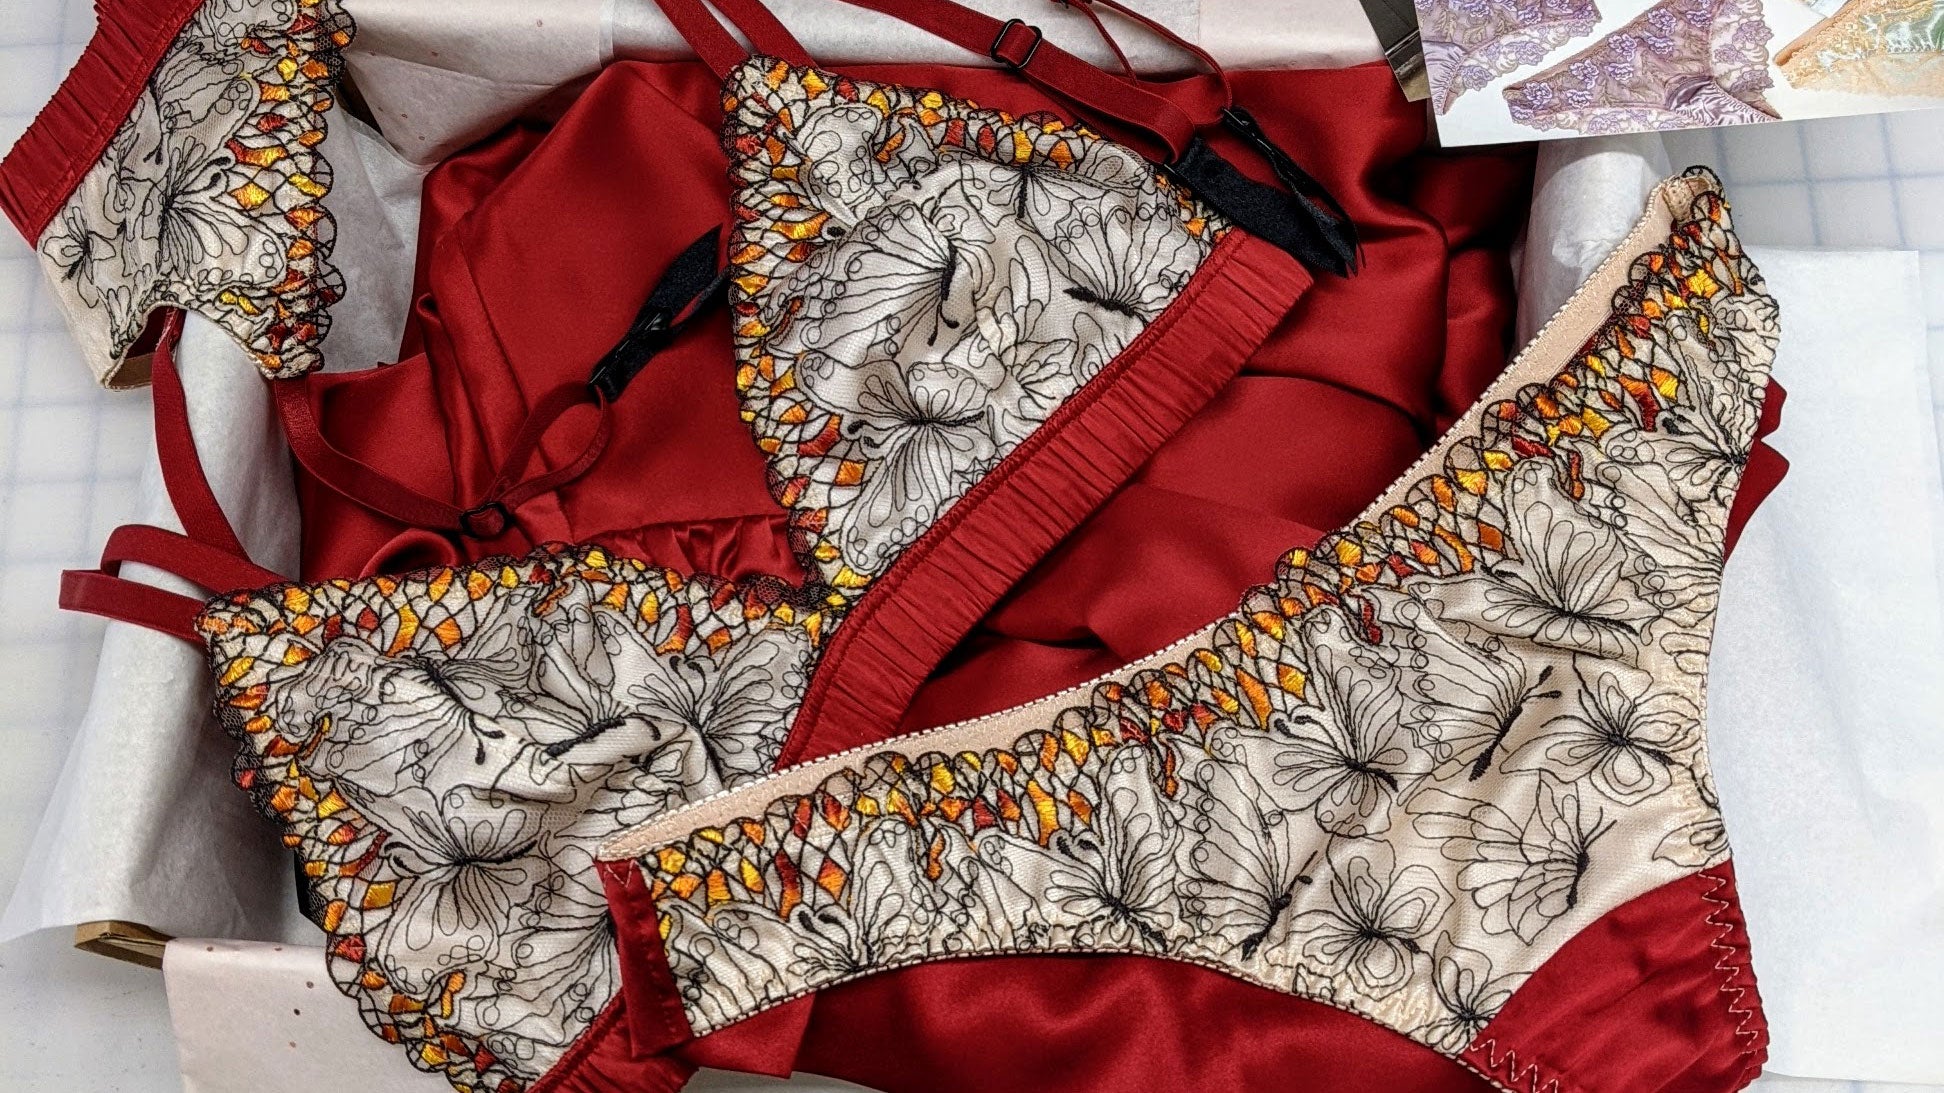 Silk bra and panty sets with lace in red satin